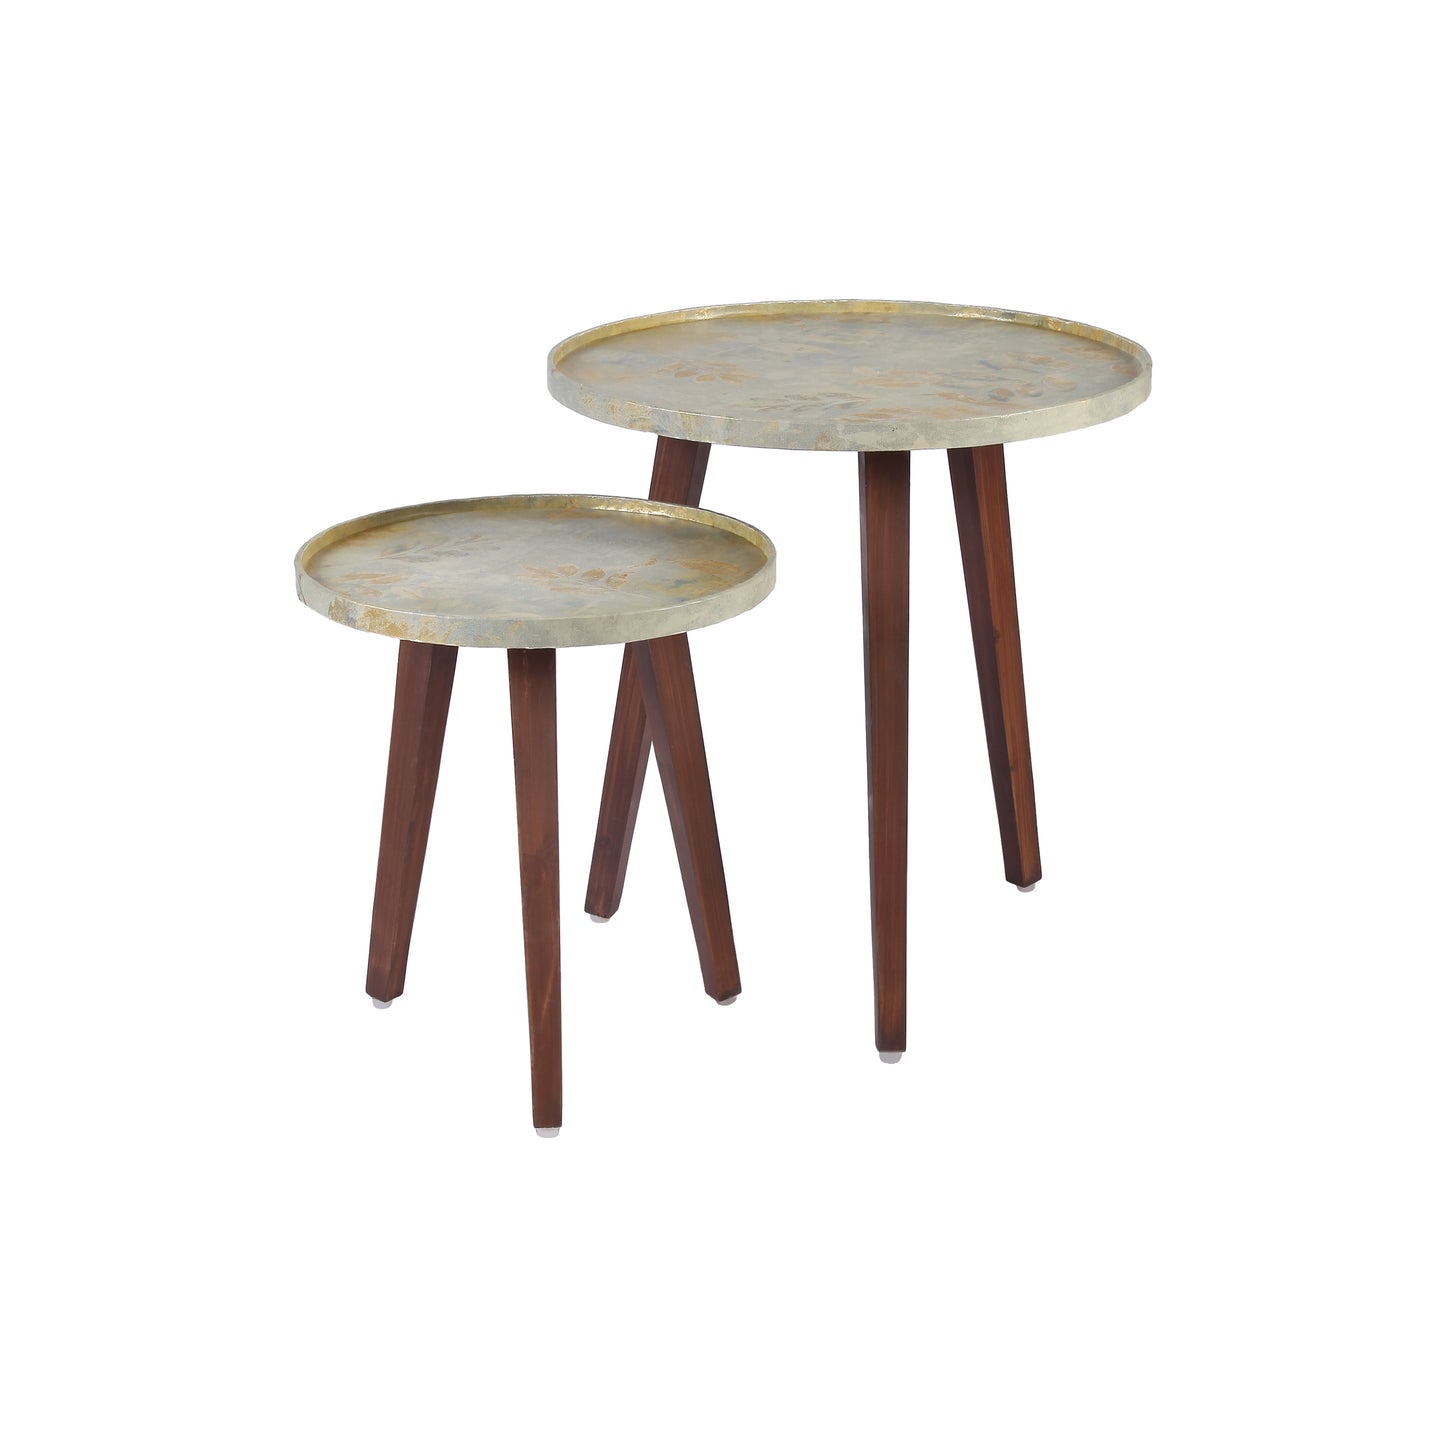 A Tiny Mistake Autumn Wooden Nesting Tables (Set of 2), Living Room Decor